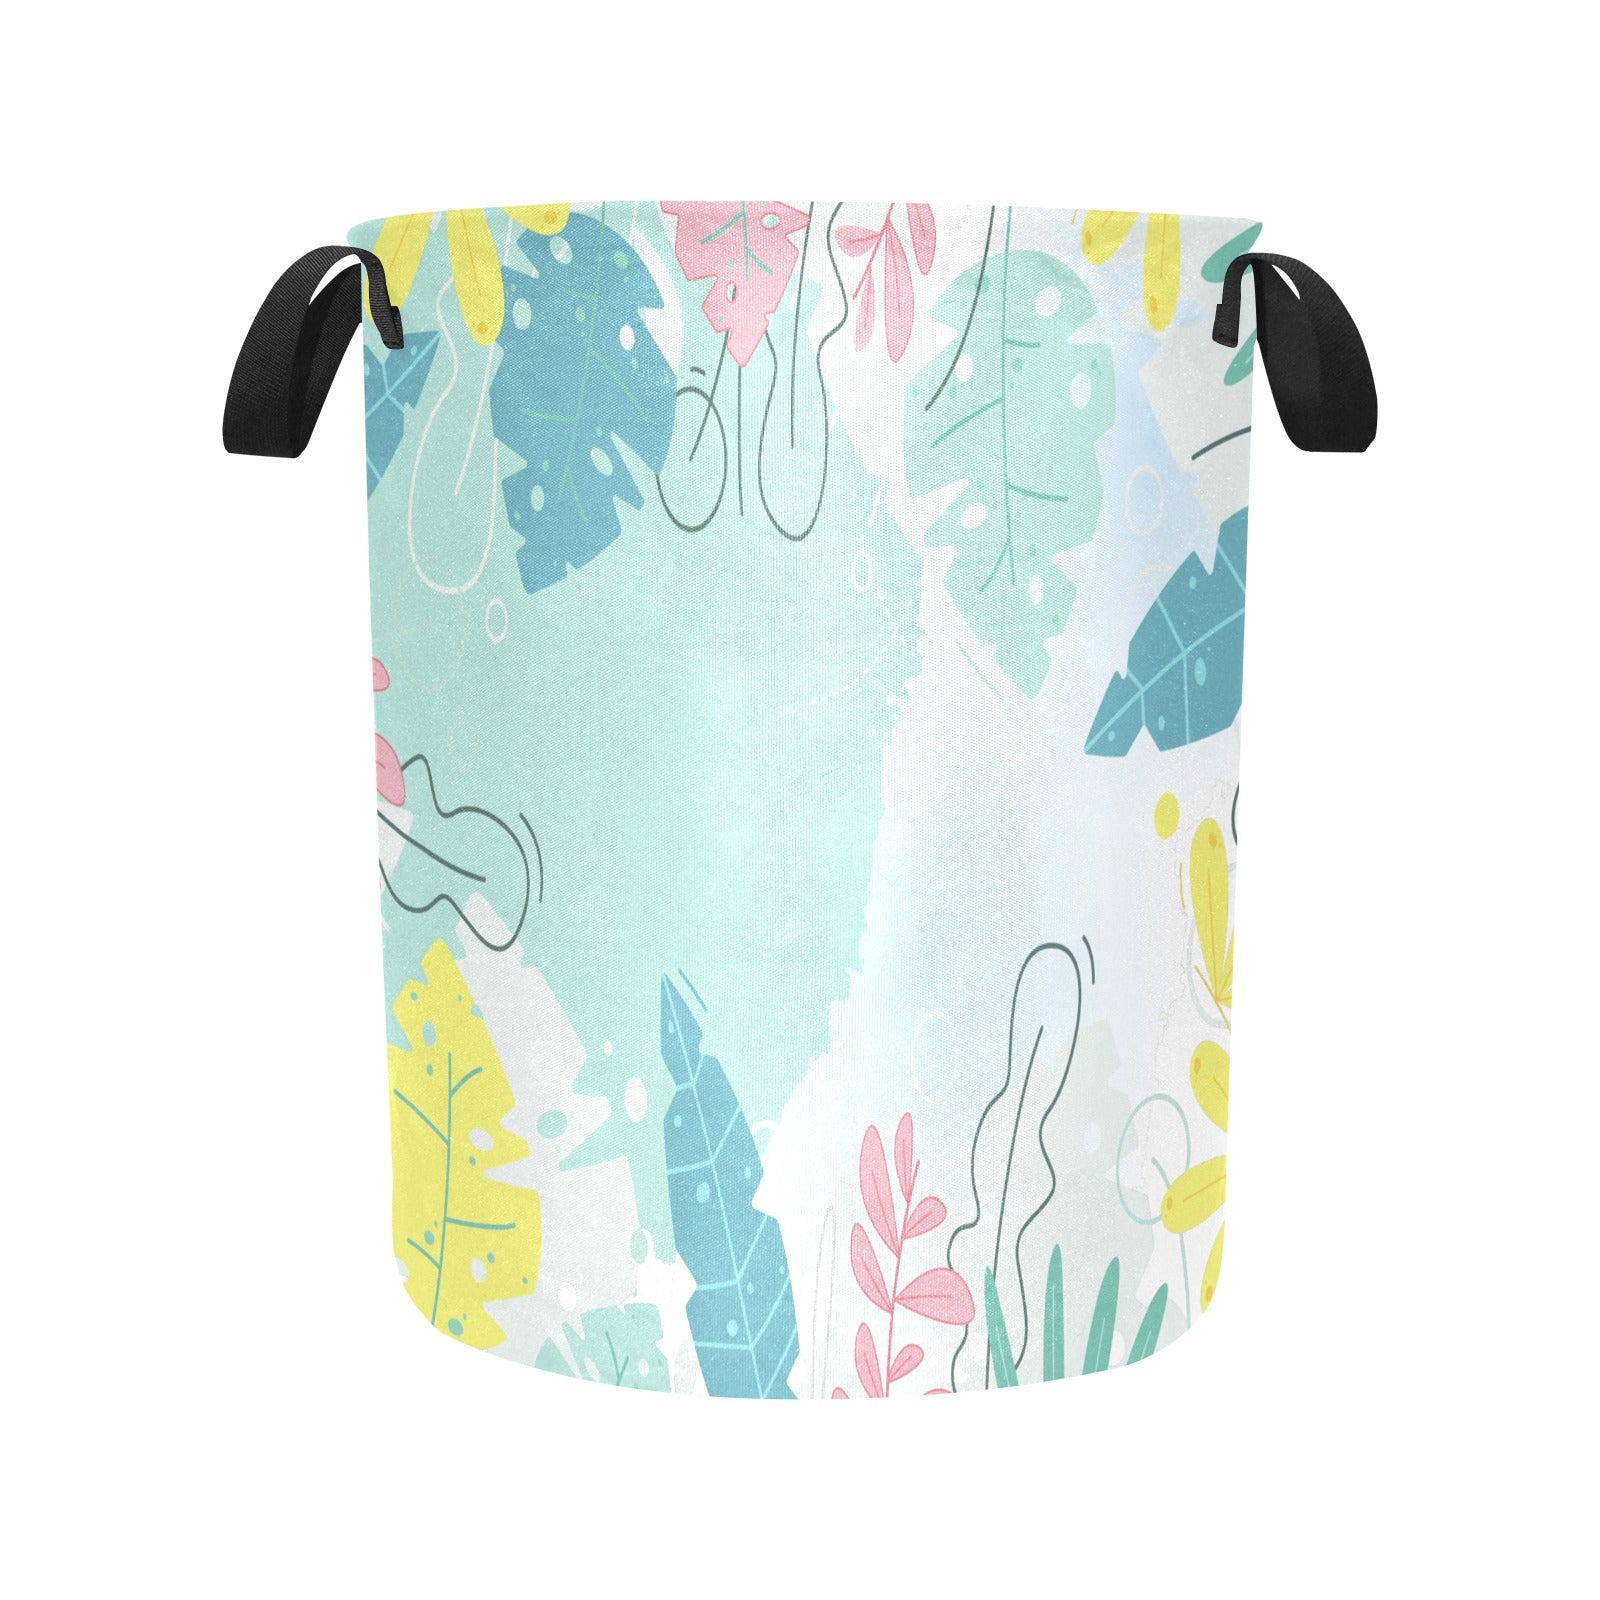 Pastel Floral Laundry Bag - Laundry Bag (Large) - Zanlana Design and Home Decor